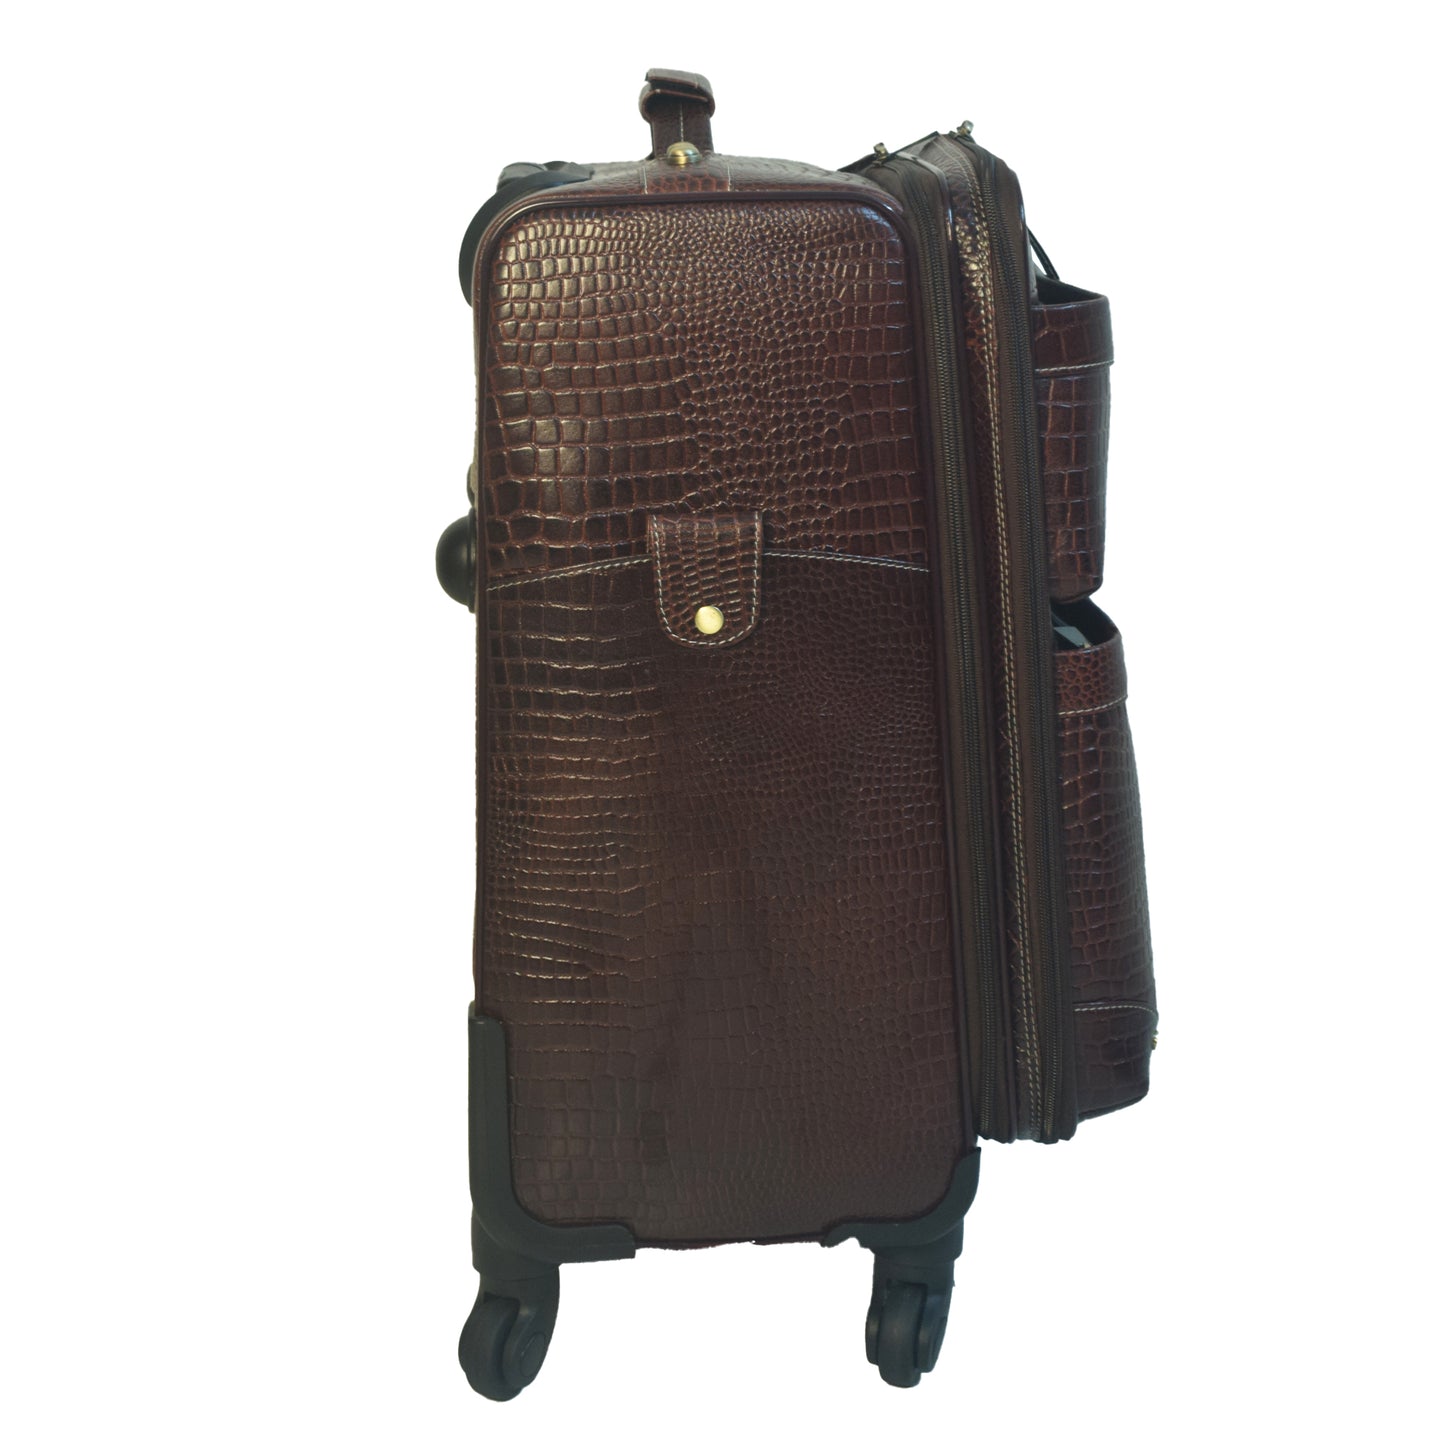 Croco Embossed Leather Trolley Bag Airport Cabin Bag Leather Weekender Leather Luggage with 360 Wheels